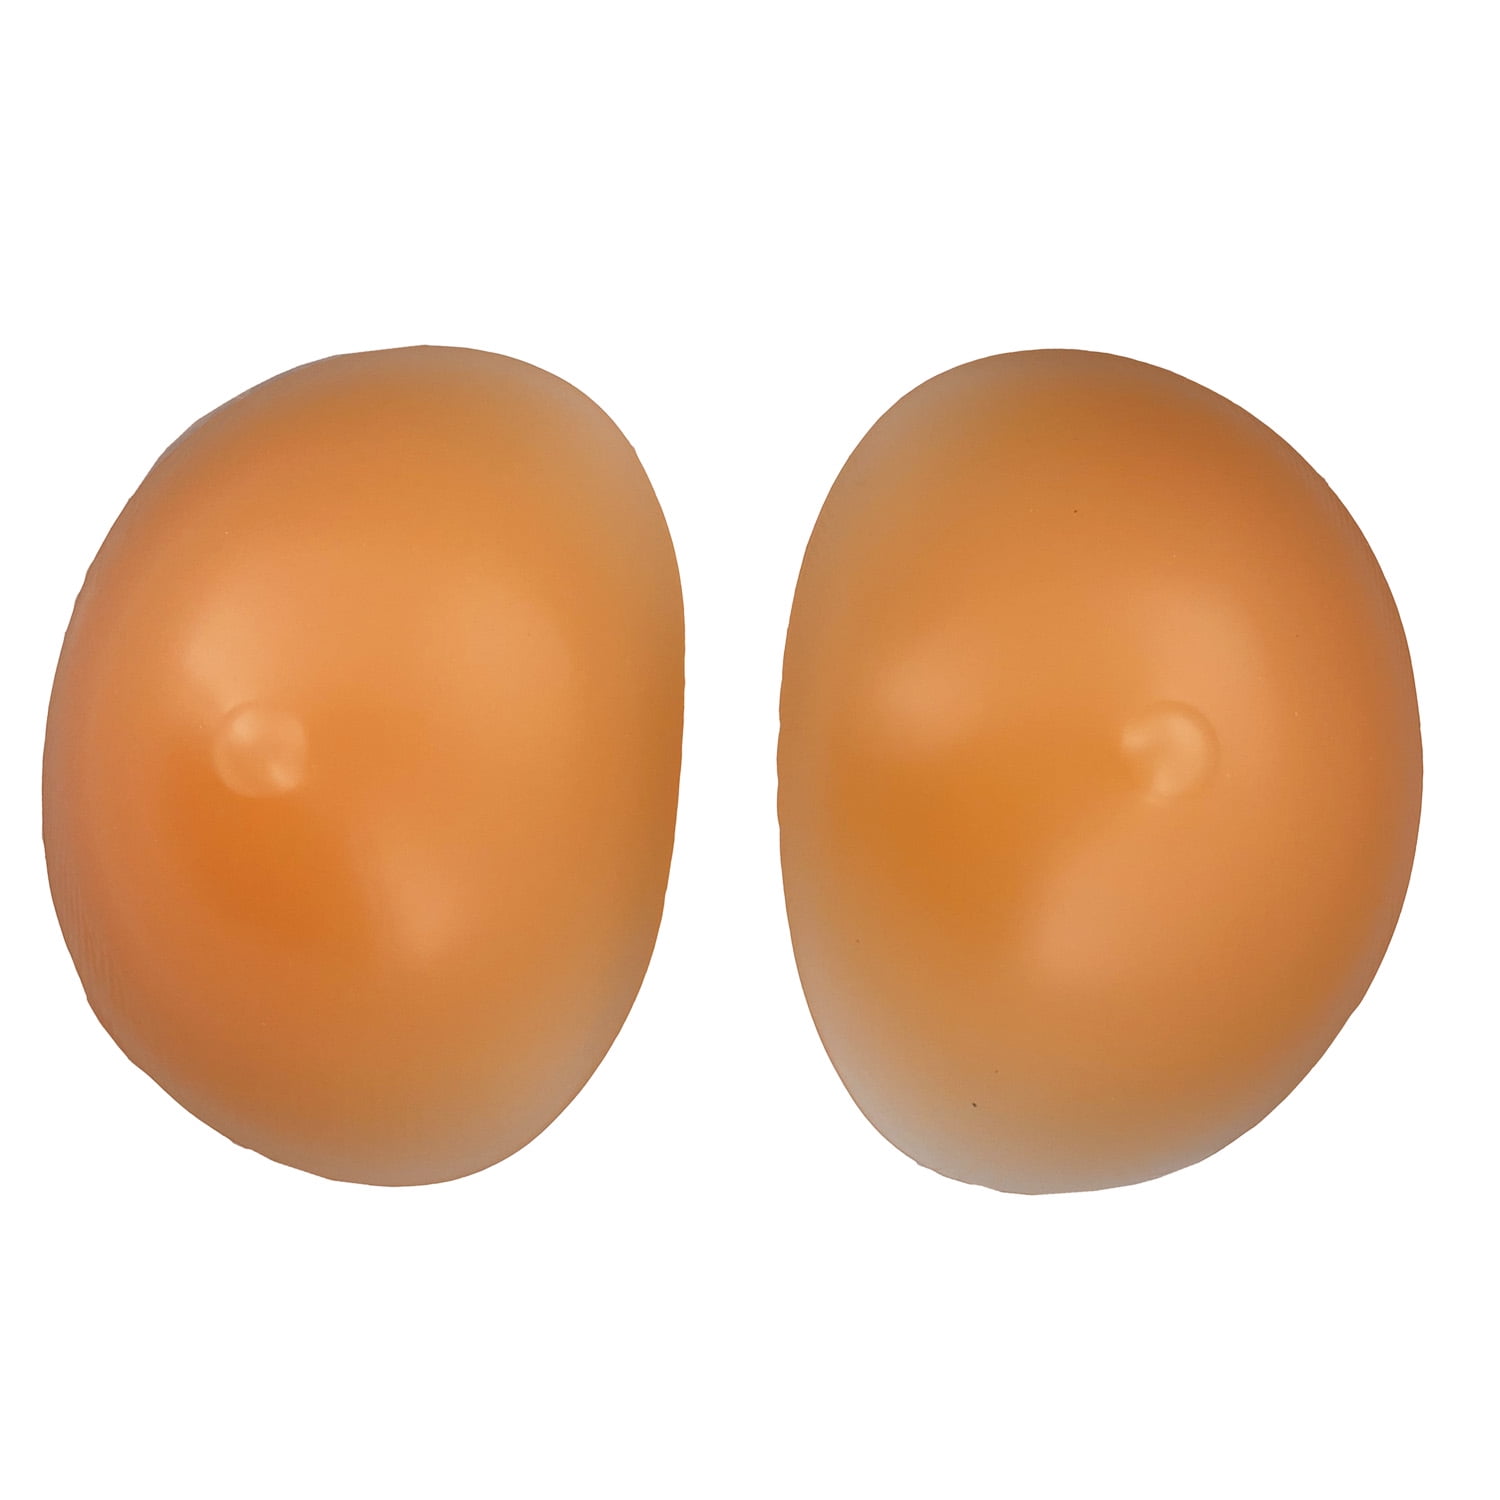 TMGONE Silicone Breast Enhancers Inserts (Nude) Silicone Breast